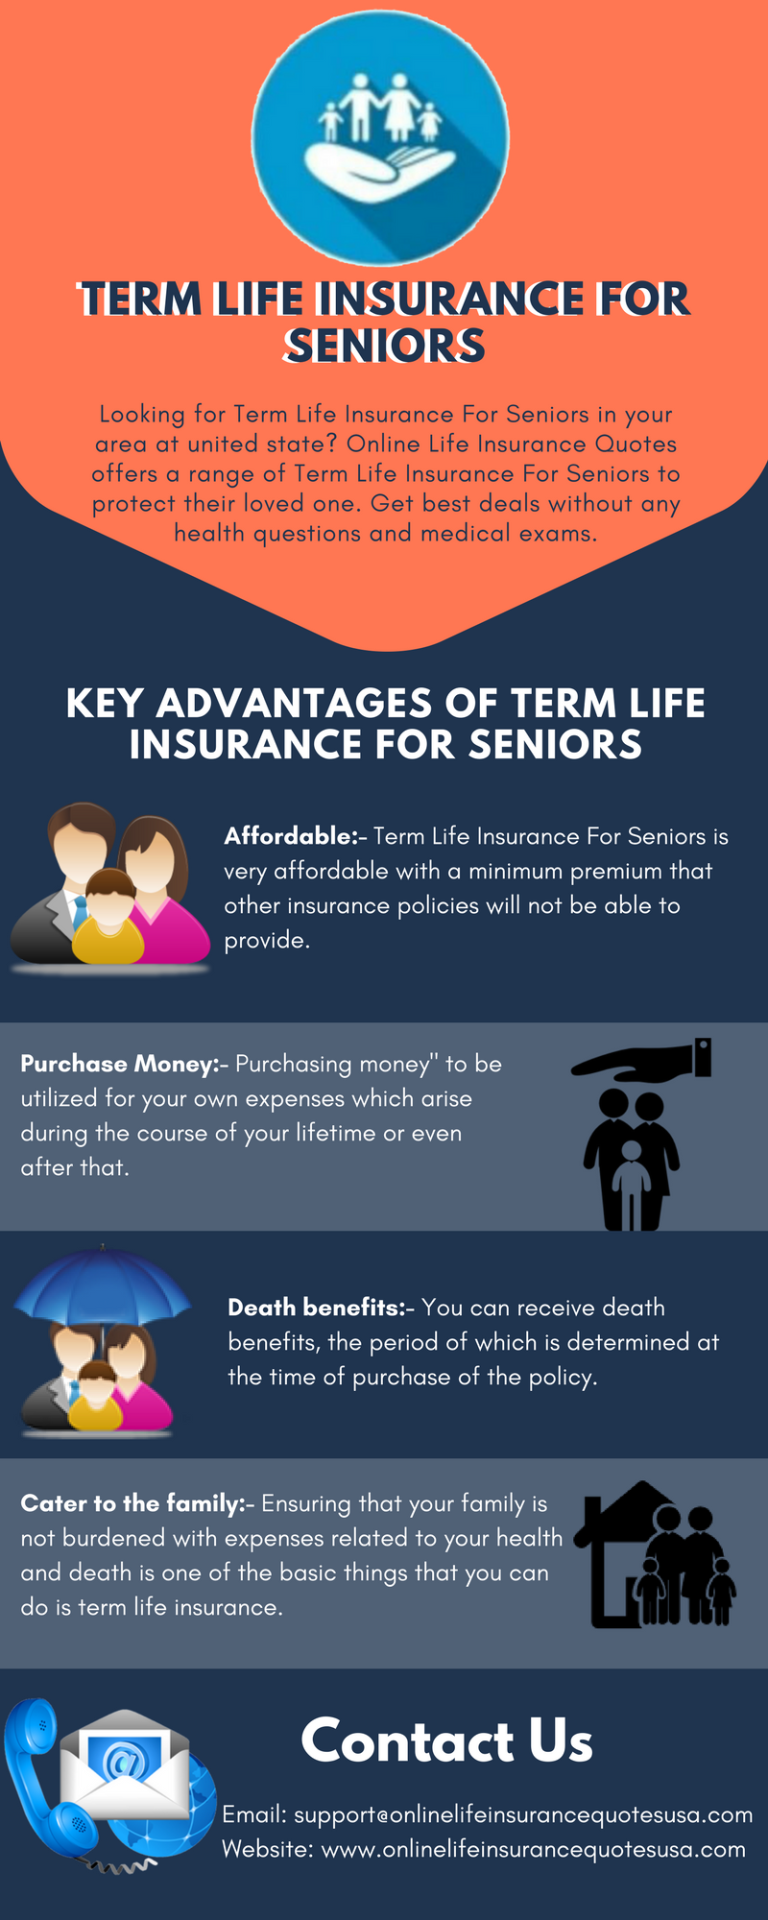 10 Get Term Life Insurance Quotes Online Best life quotes in HD images